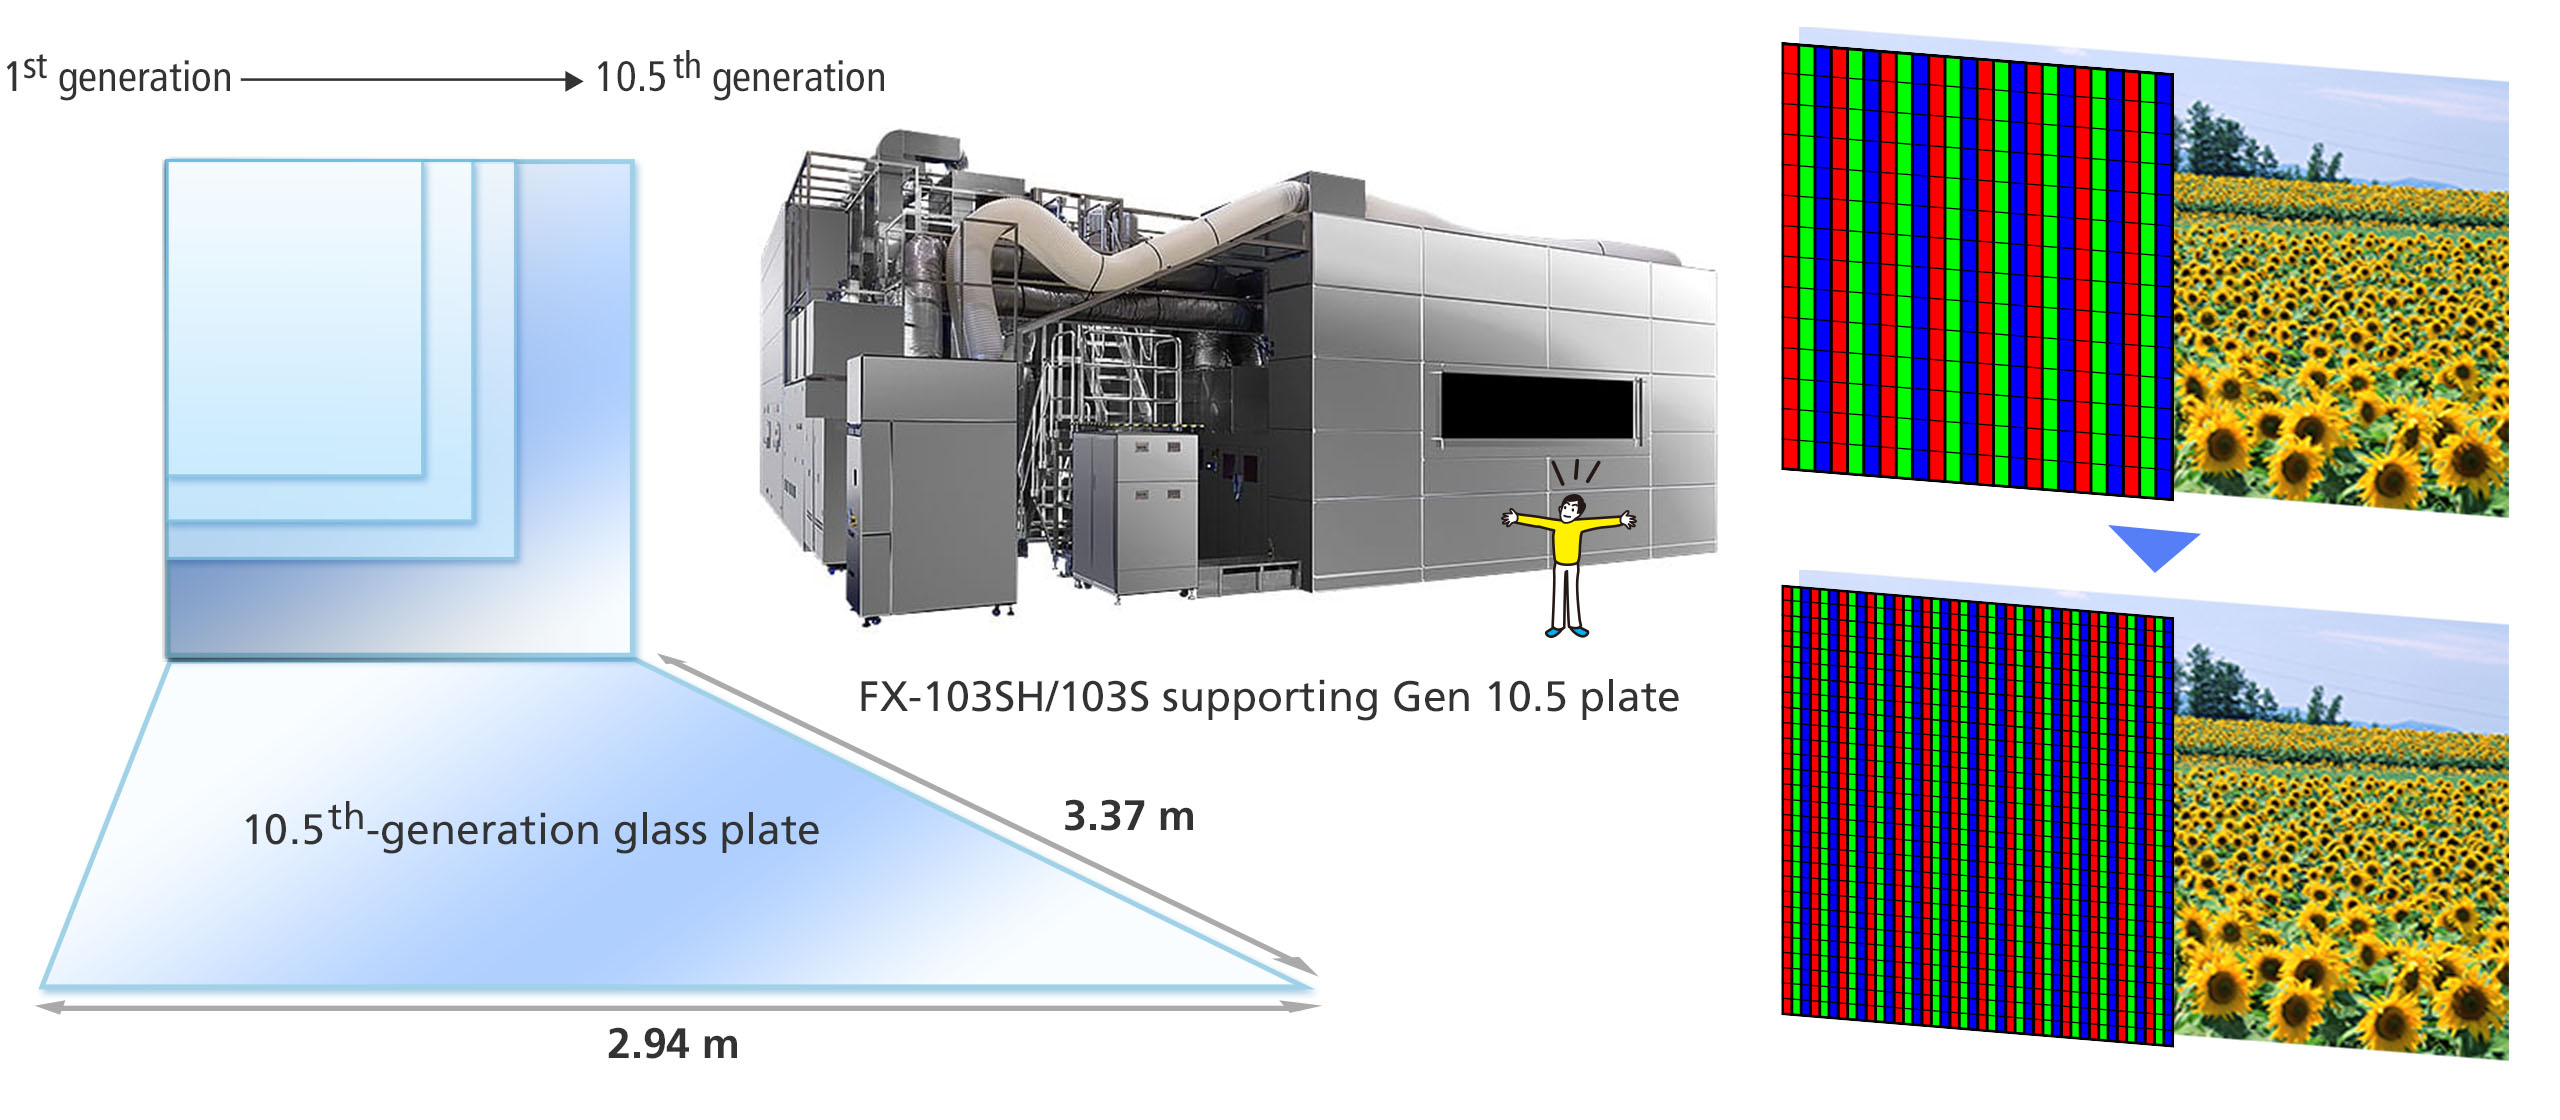 Larger glass plates and higher definition panels. FX-103SH/103S supports the Gen 10.5 glass plate.